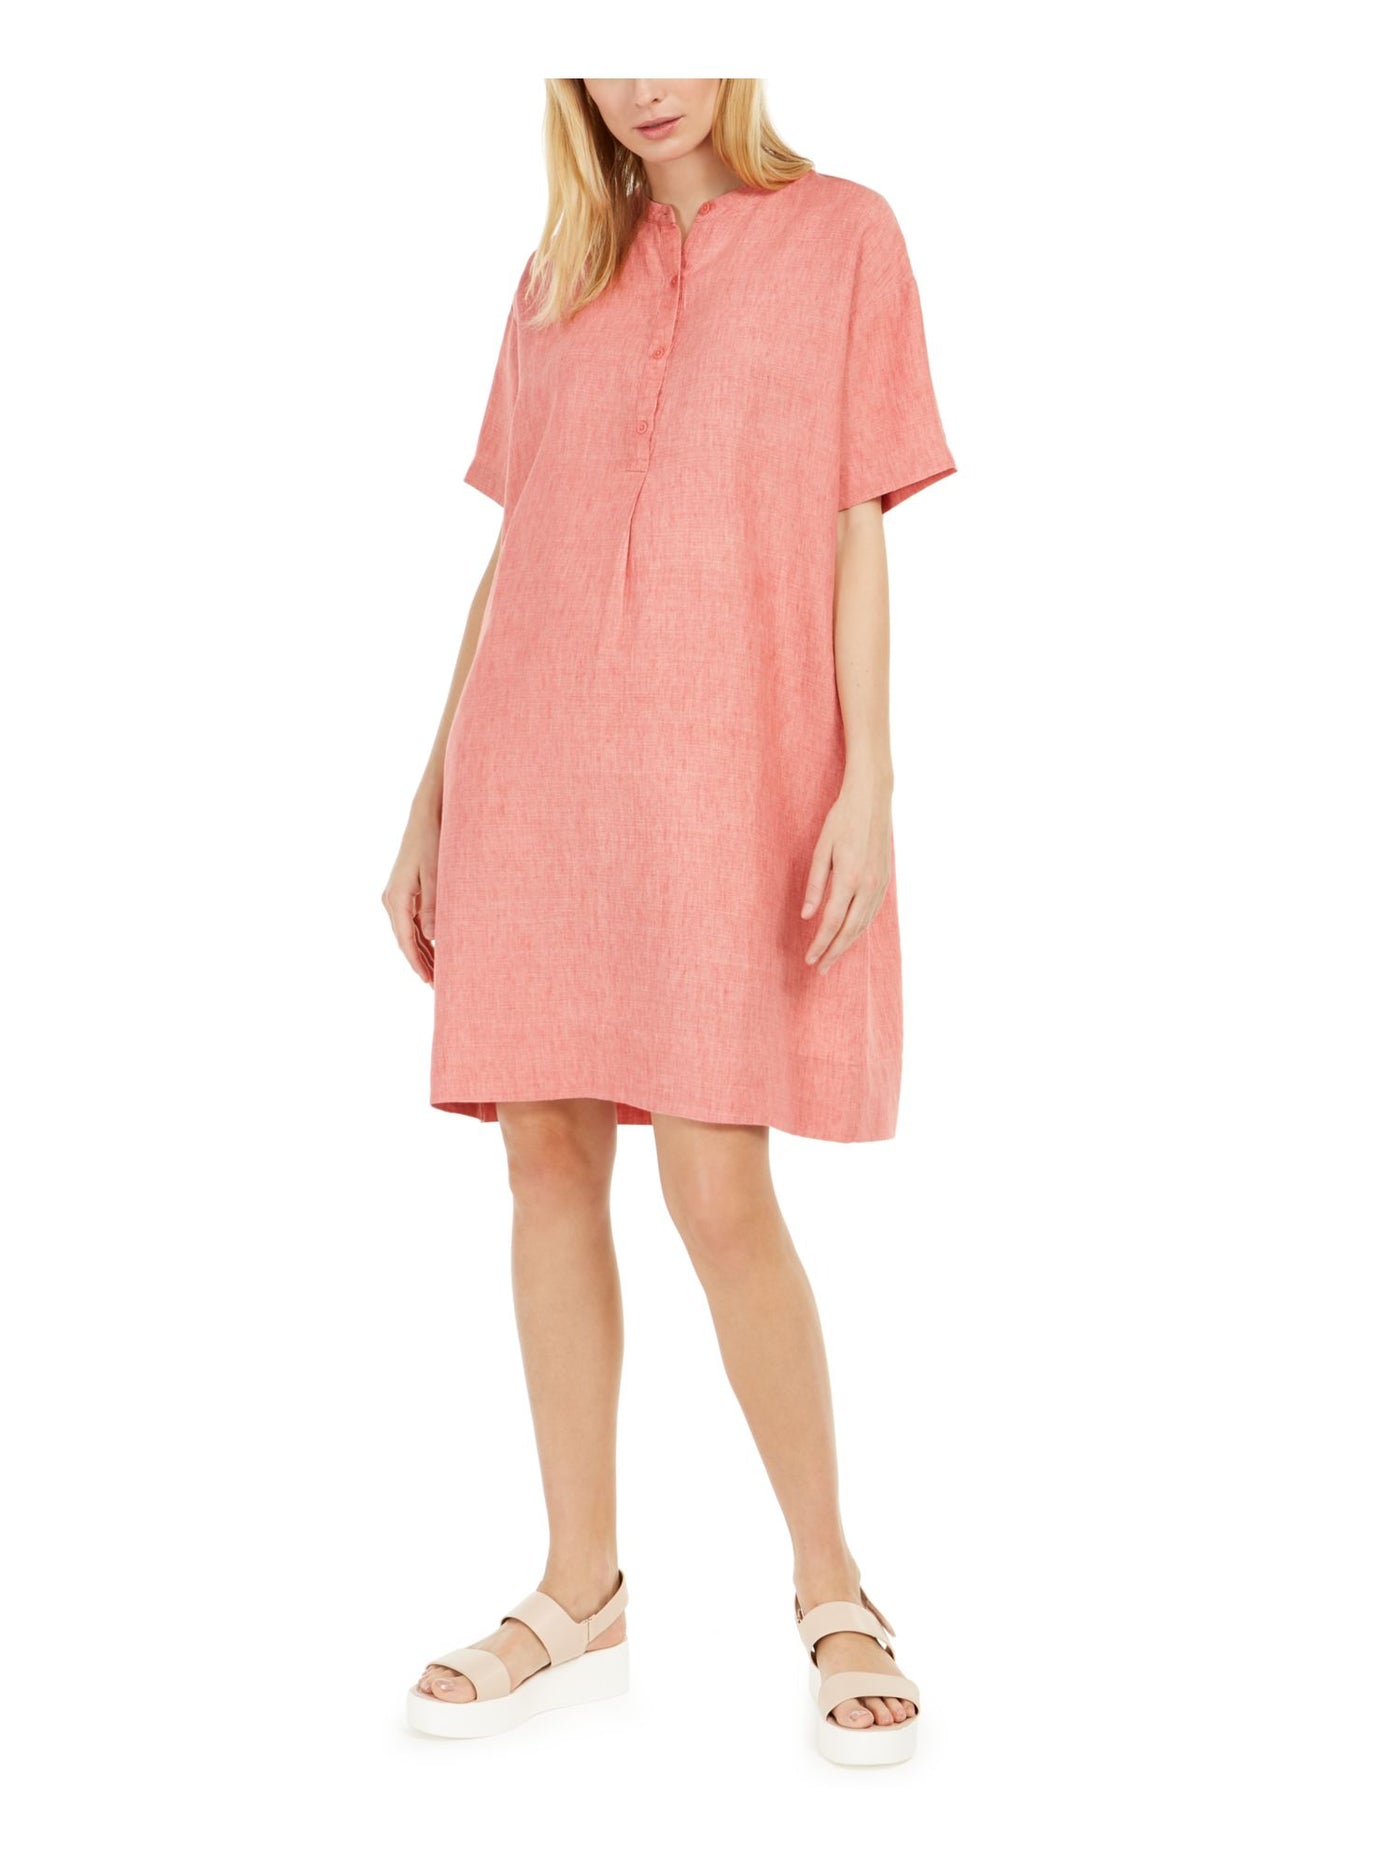 EILEEN FISHER Womens Coral Short Sleeve Crew Neck Above The Knee Shift Dress L